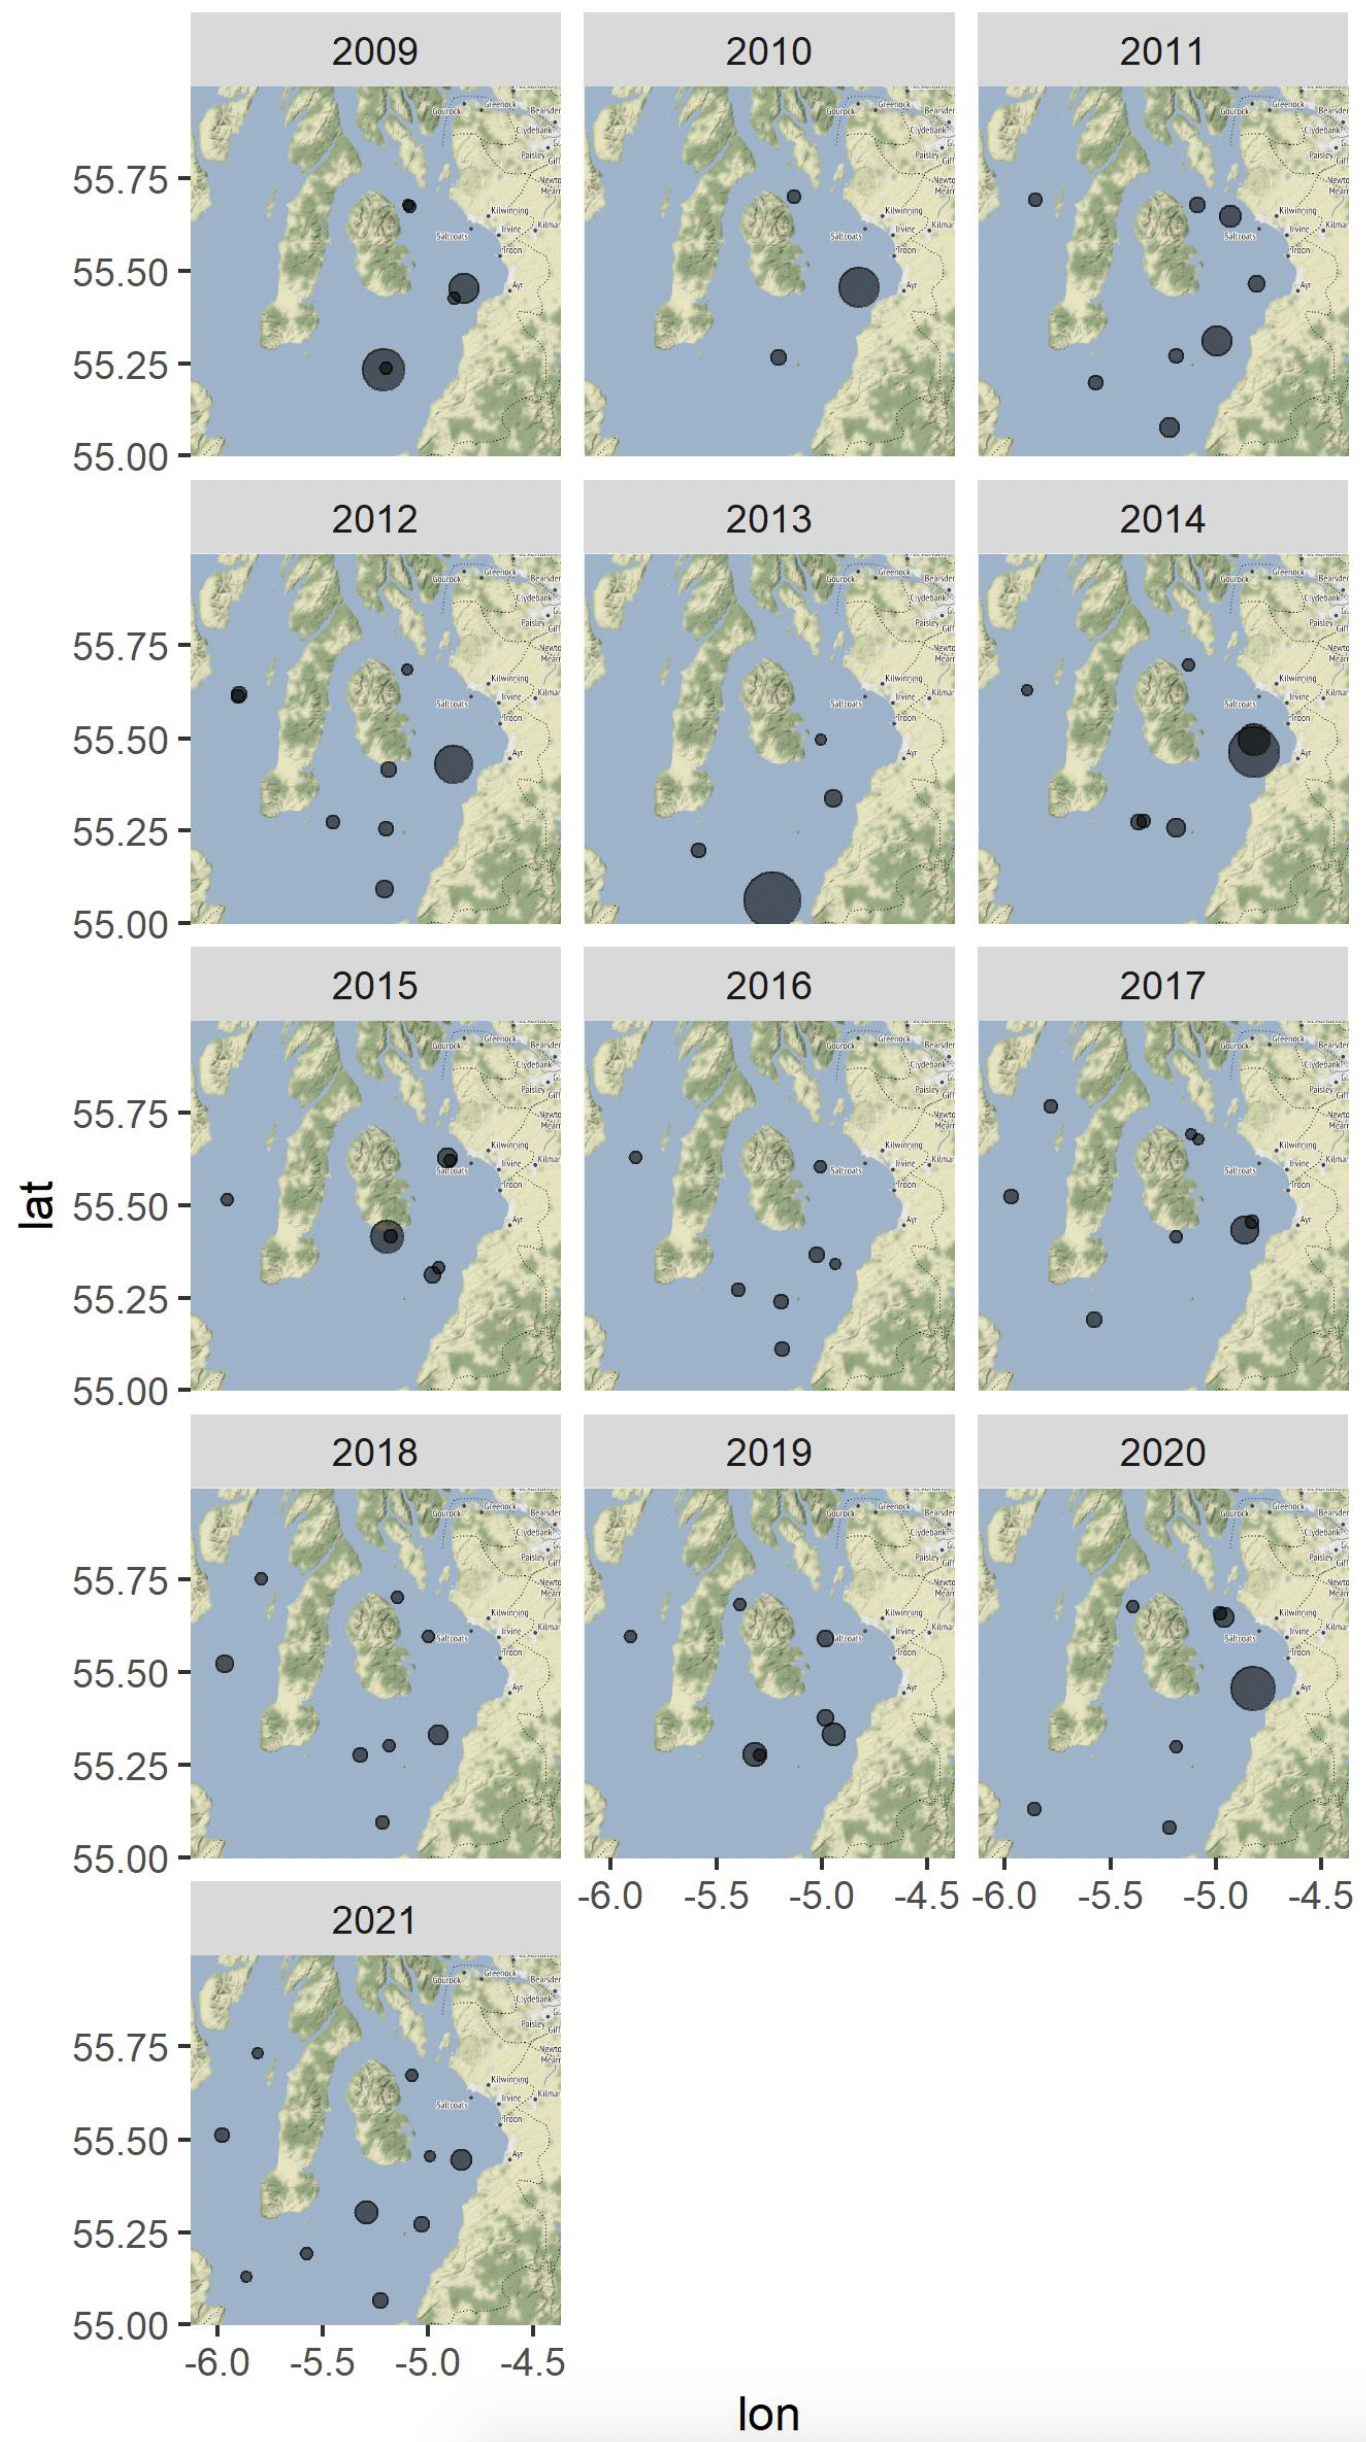 Herring abundances on IBTS tows, between 2009 and 2021 in the Clyde area